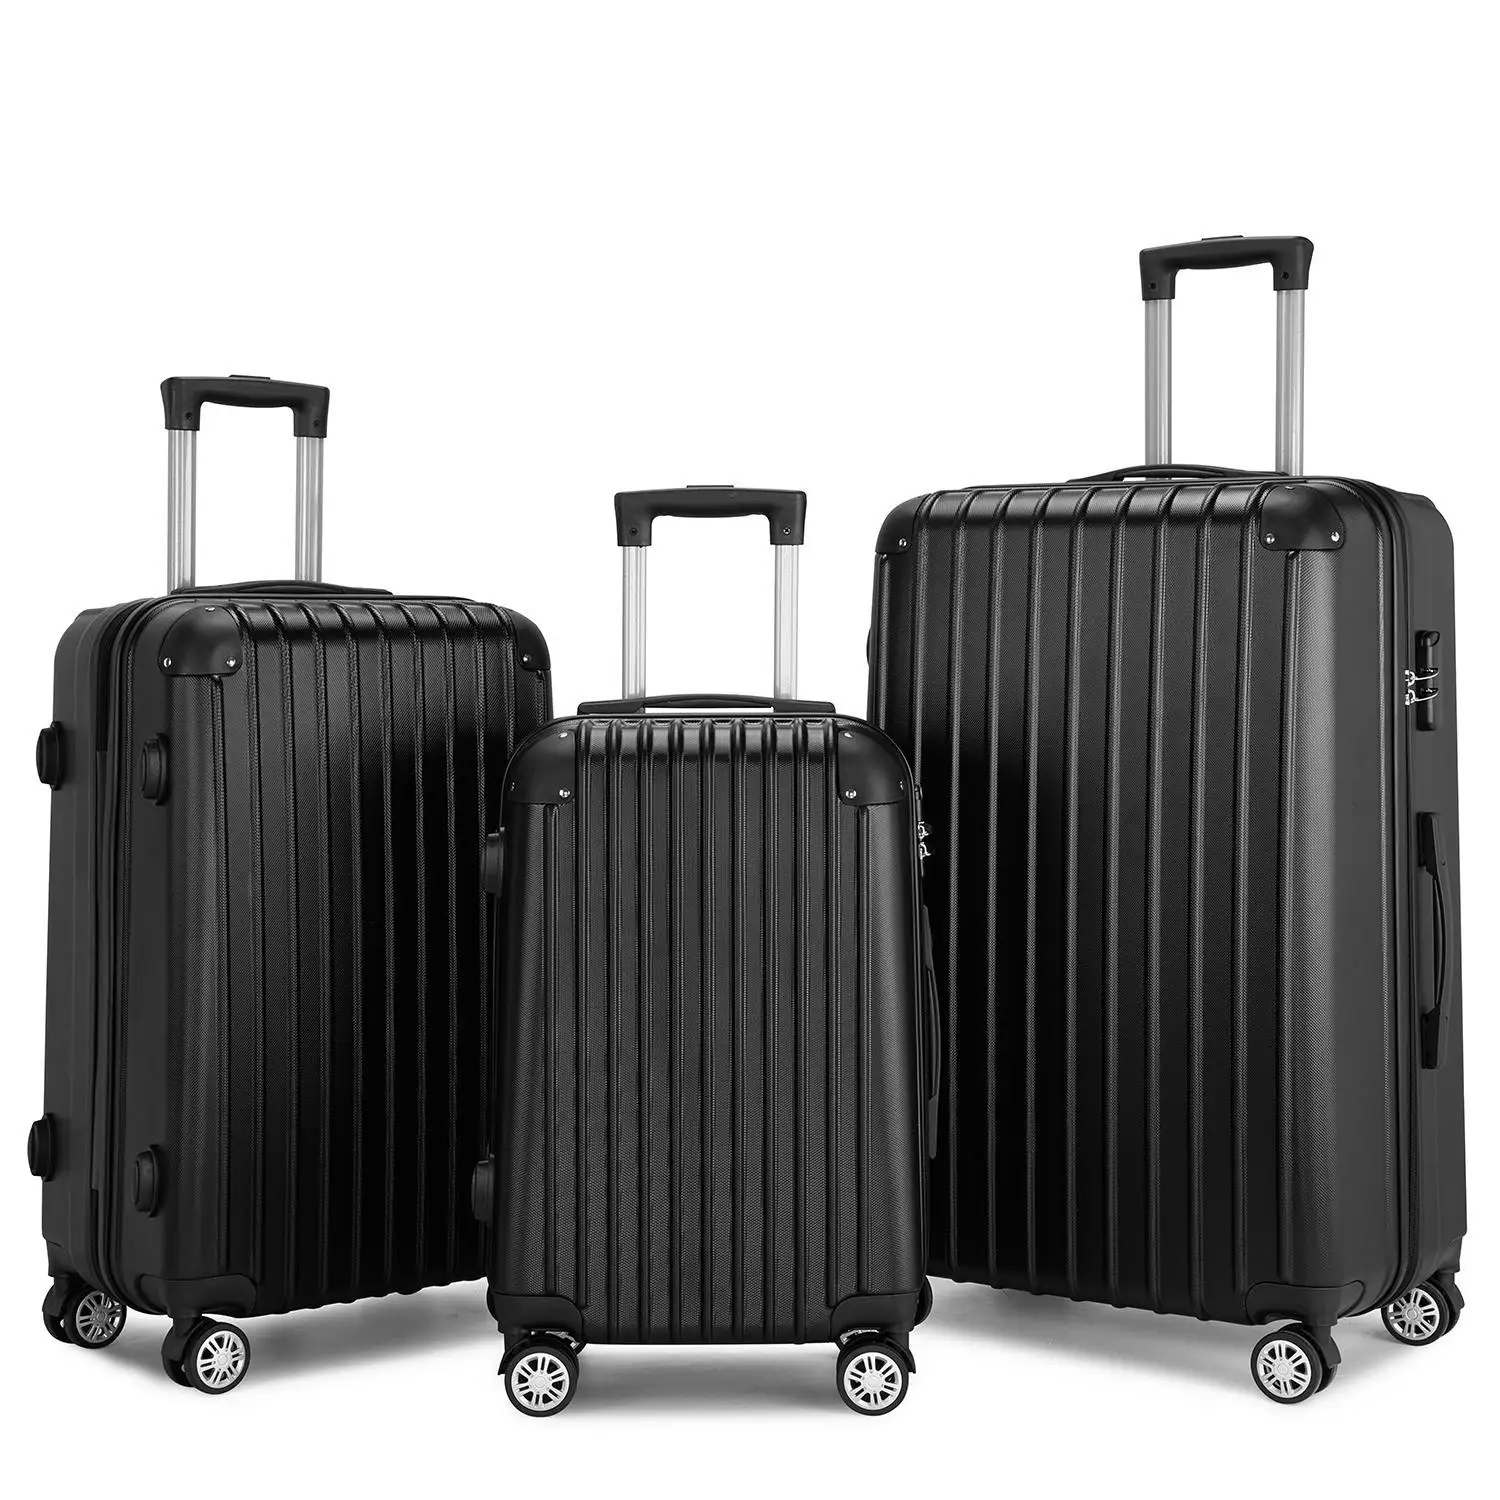 3 Pieces Abs Travel Luggage Set Suitcase Airwheel Luggage Hard Shell ...